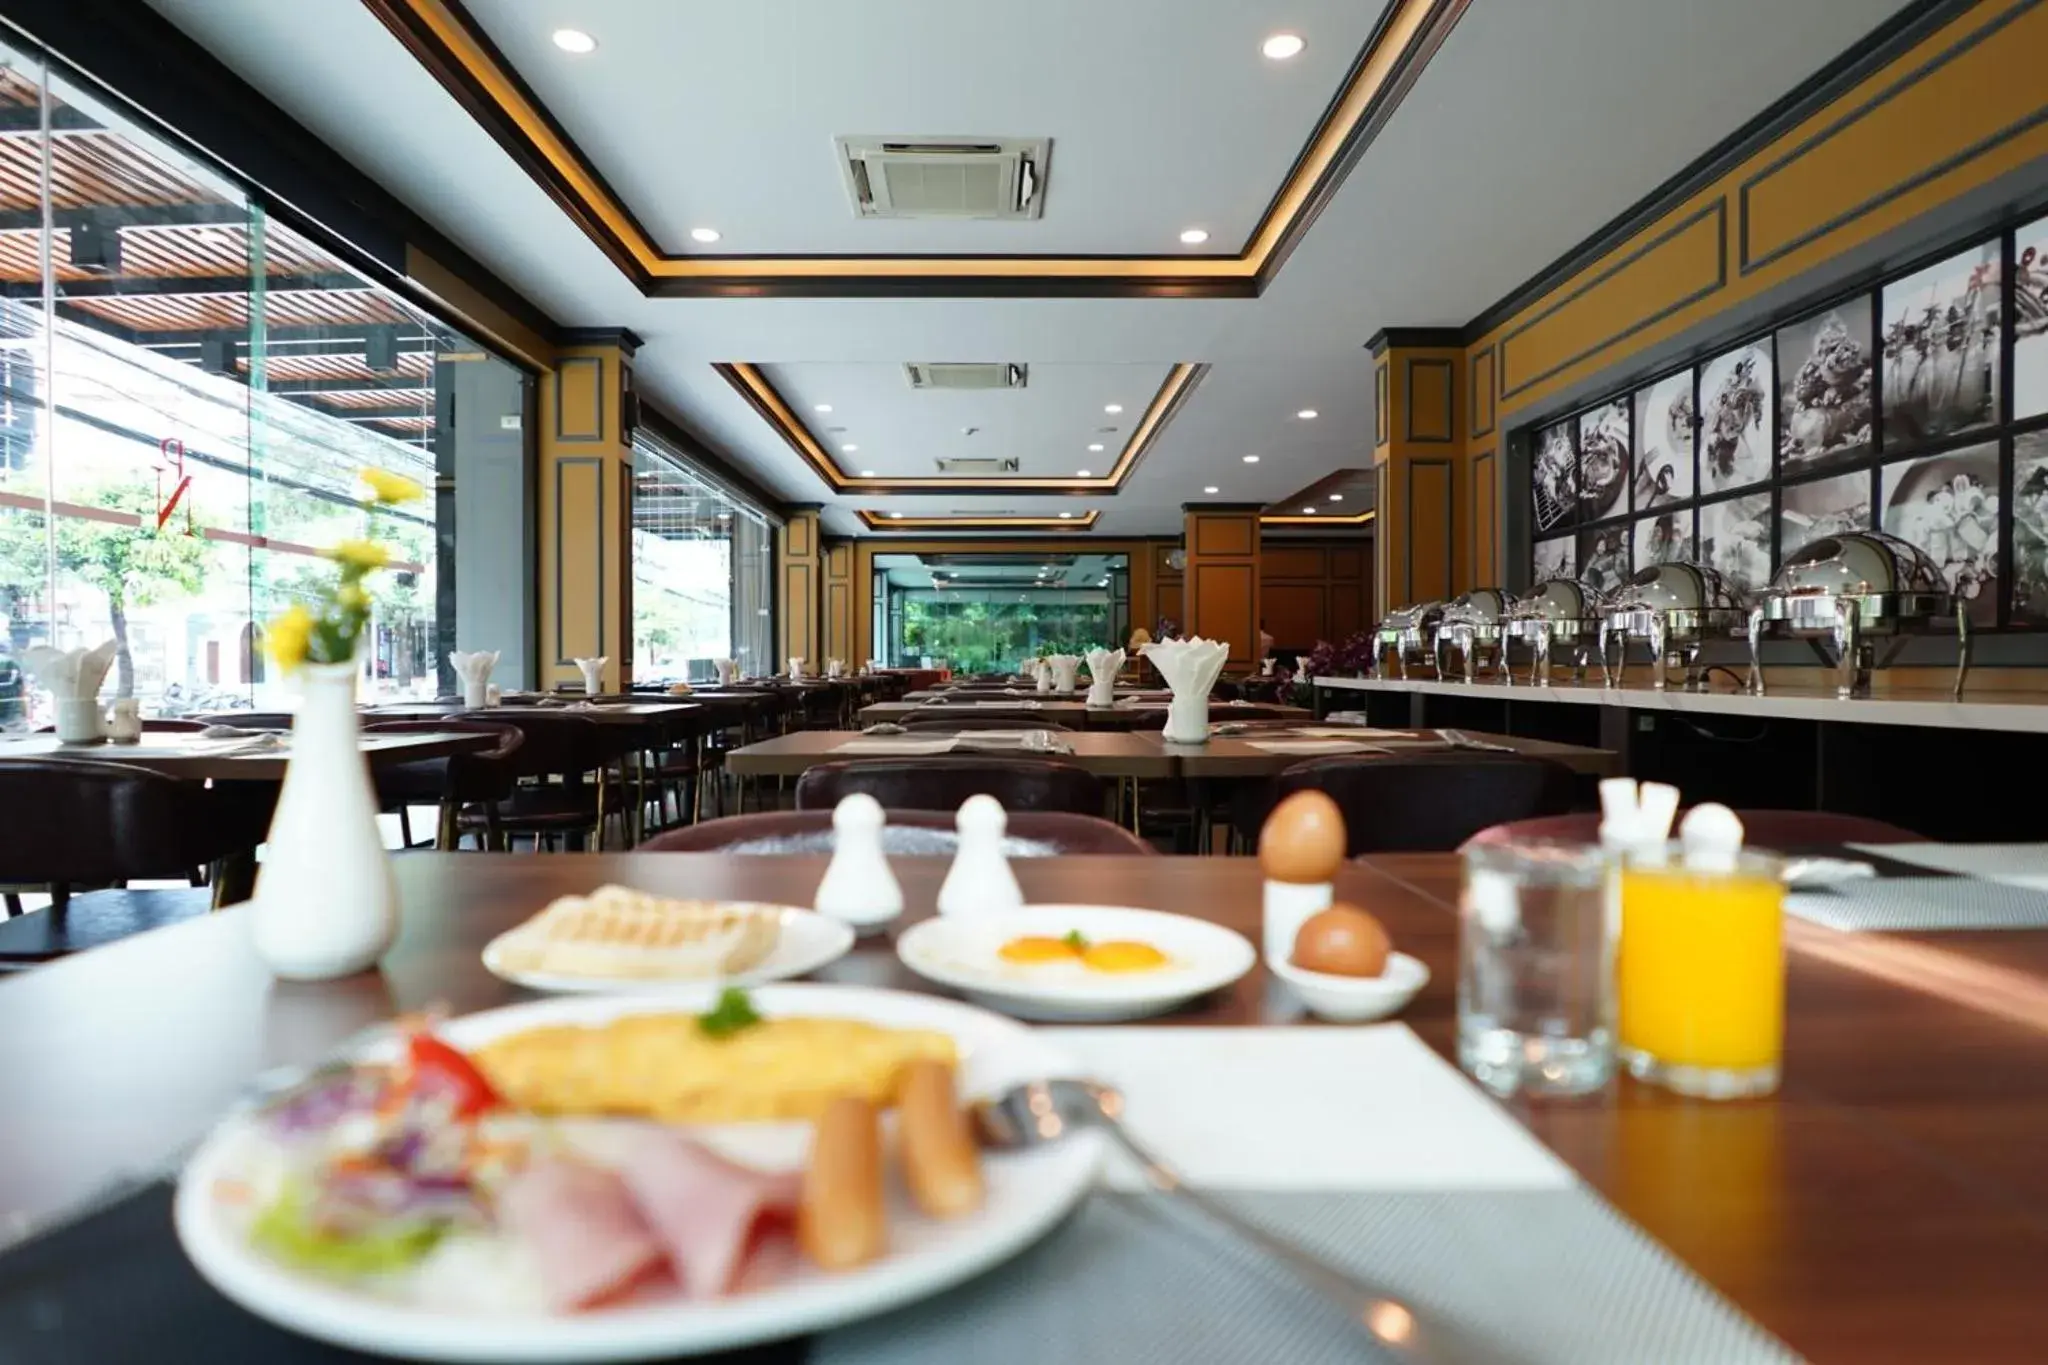 Restaurant/Places to Eat in Picnic Hotel Bangkok